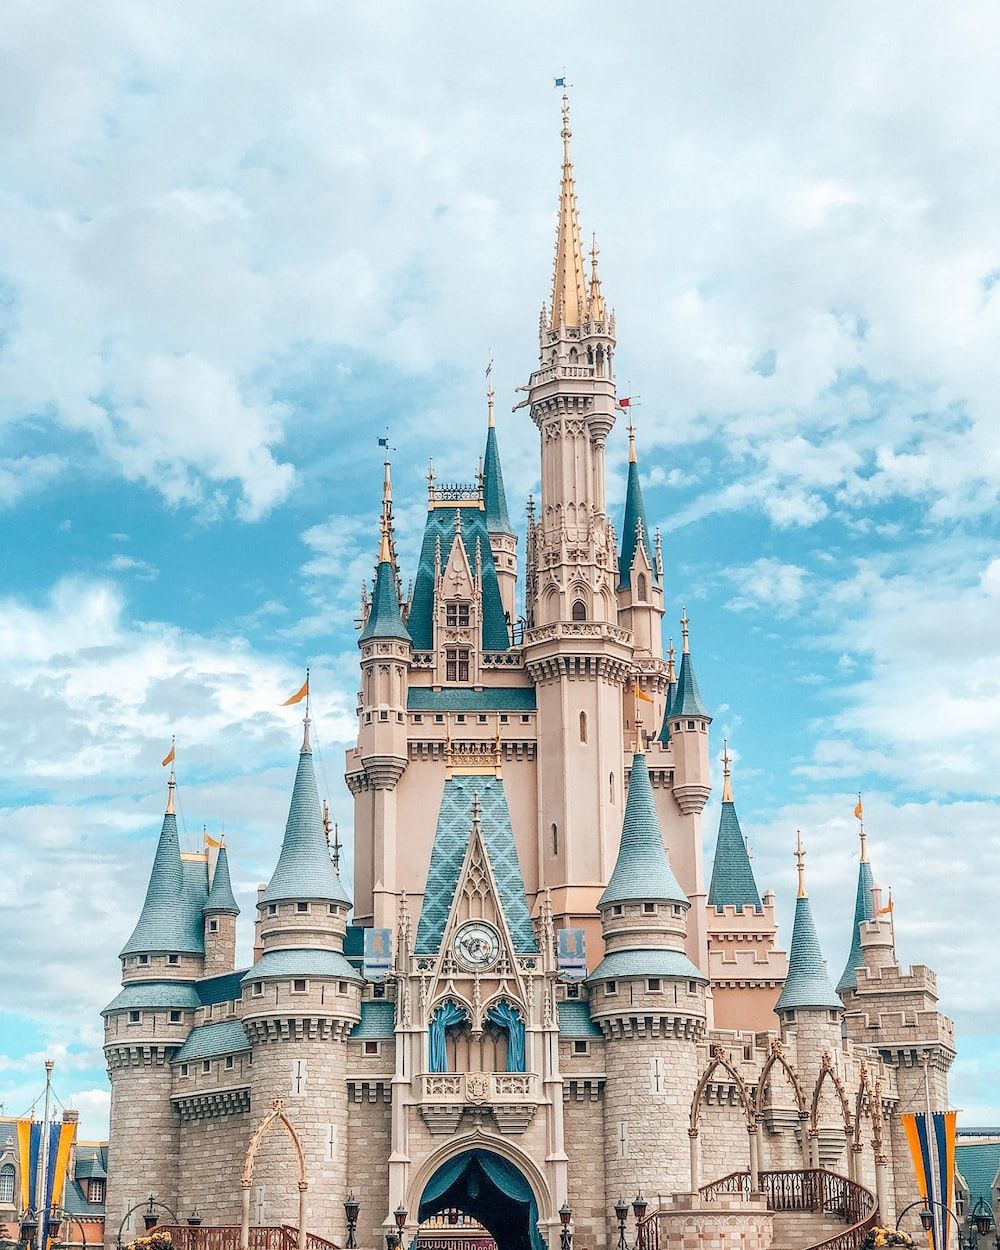 The most iconic castle in the world, the castle at Disneyworld in Florida. - Castle, Disneyland